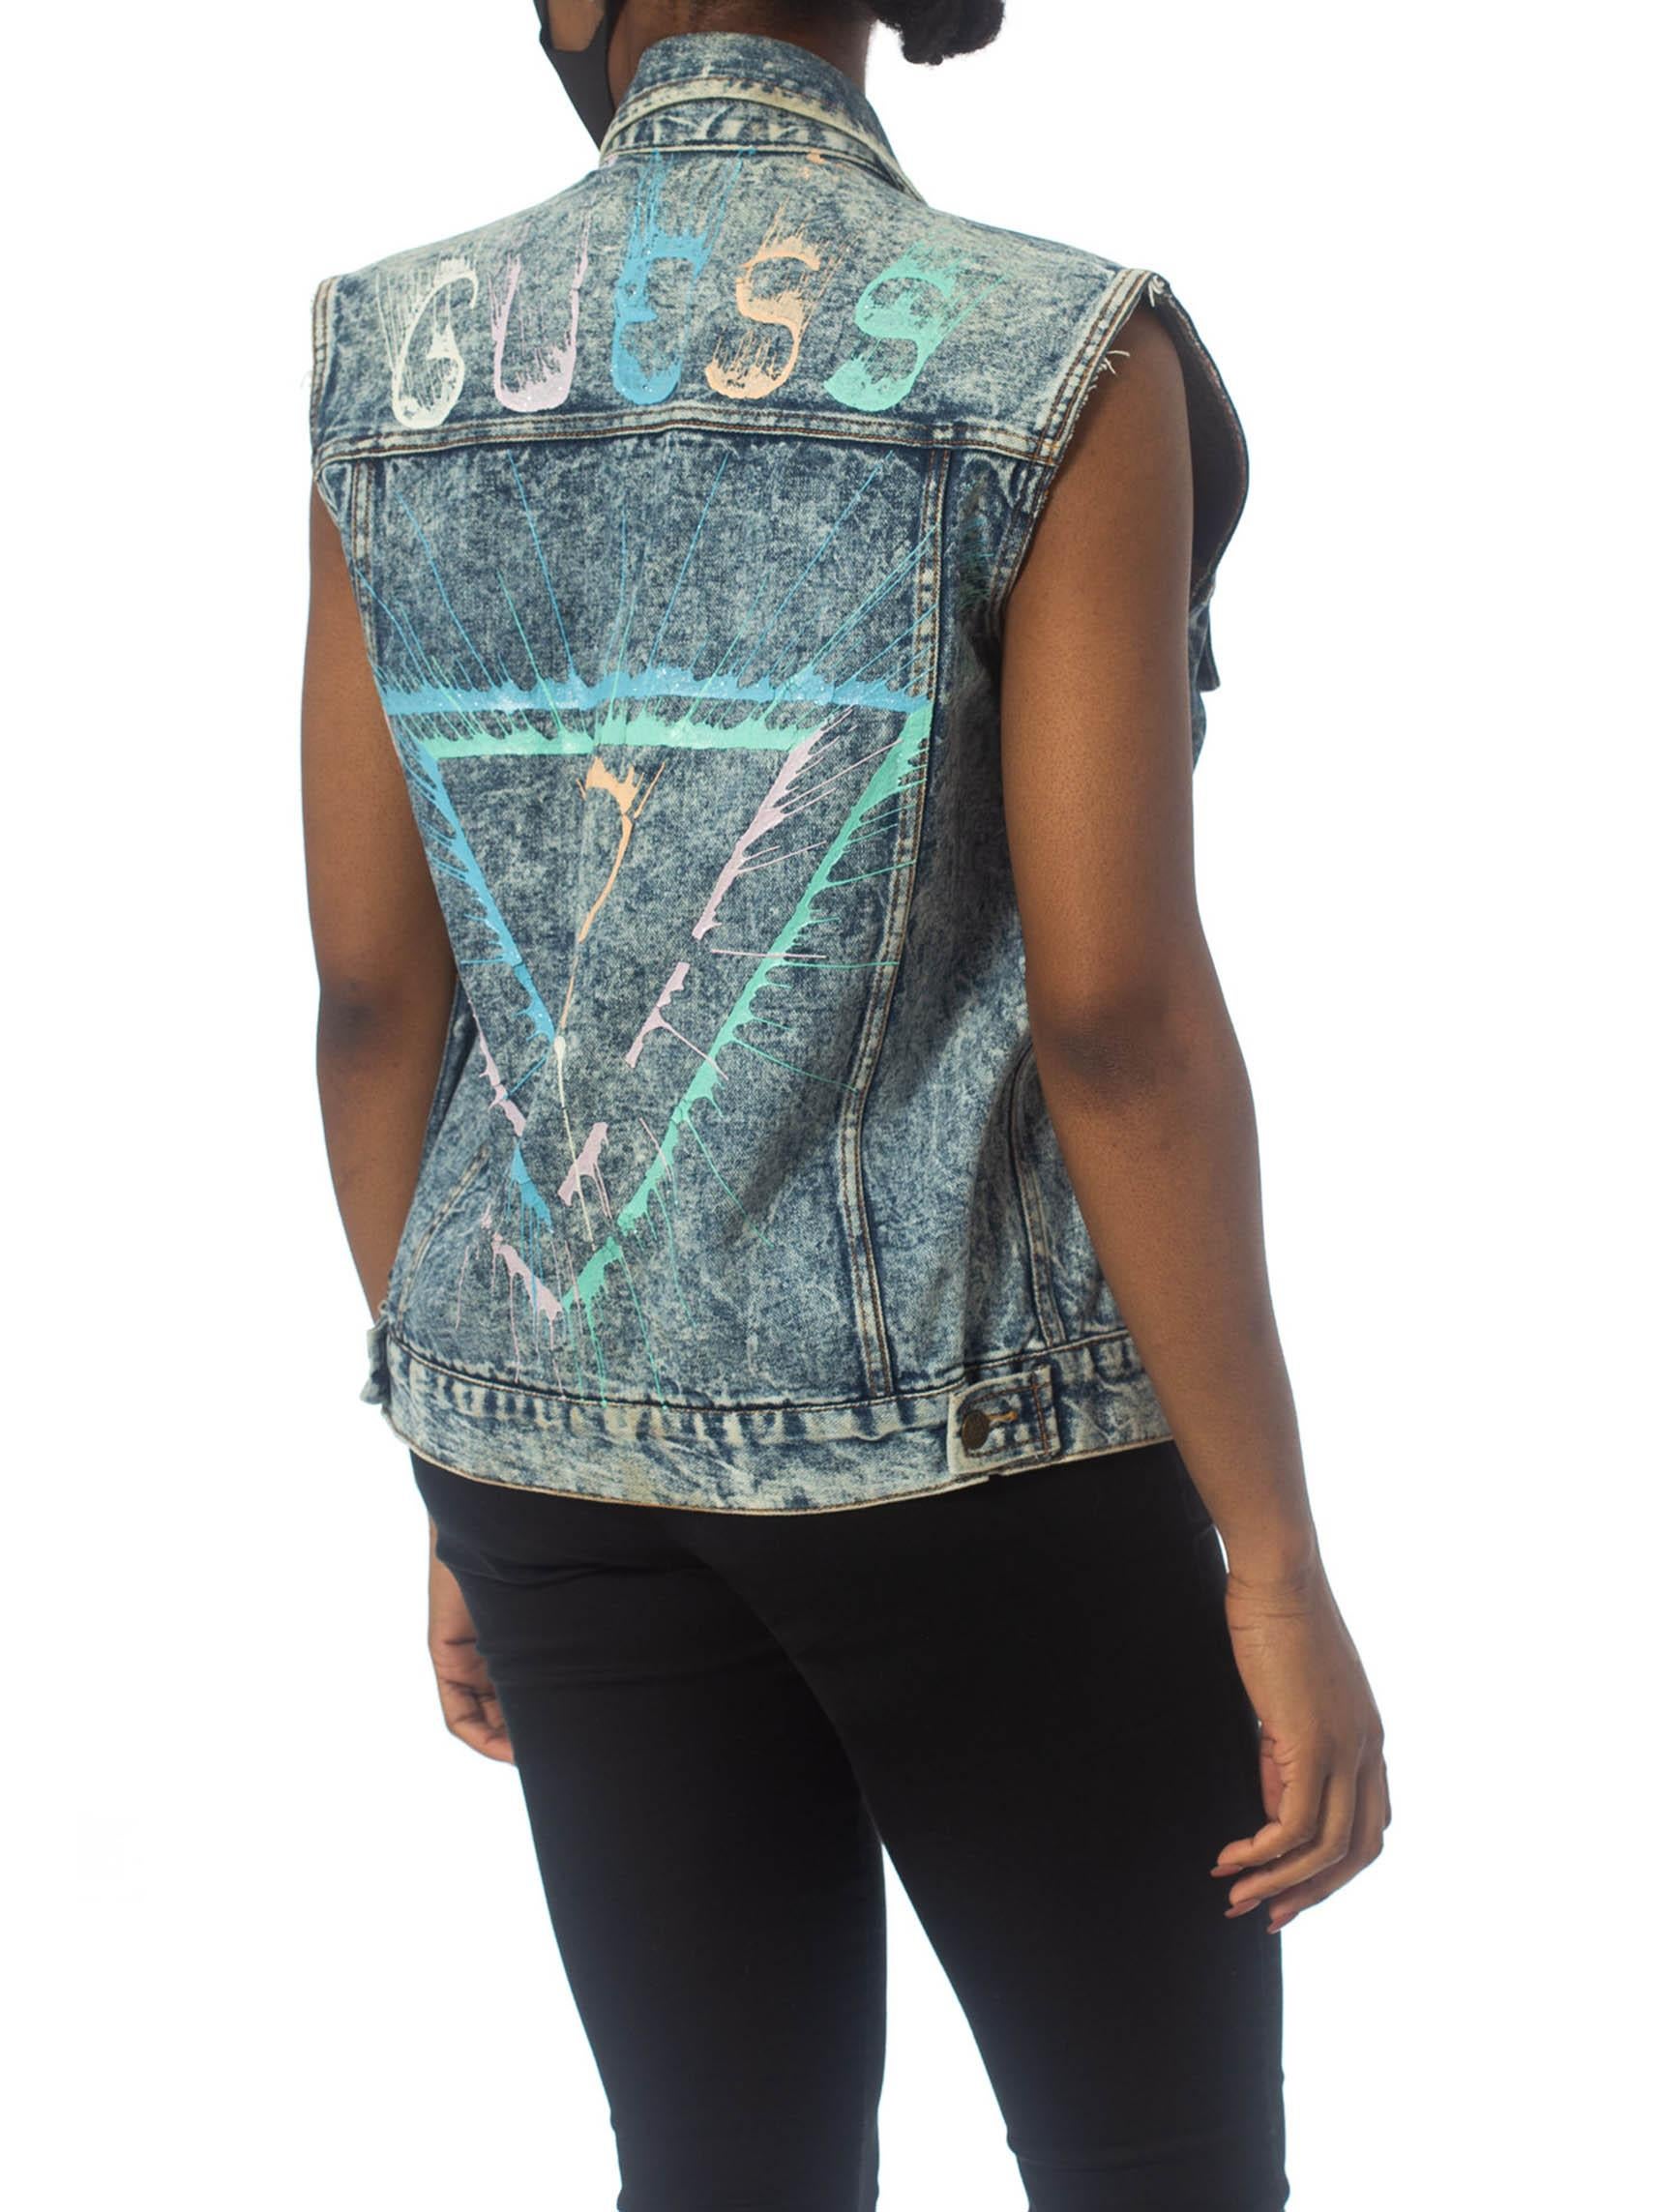 Women's 1990S GUESS Glitter Puffy Painted Acid Washed Denim Vest For Sale